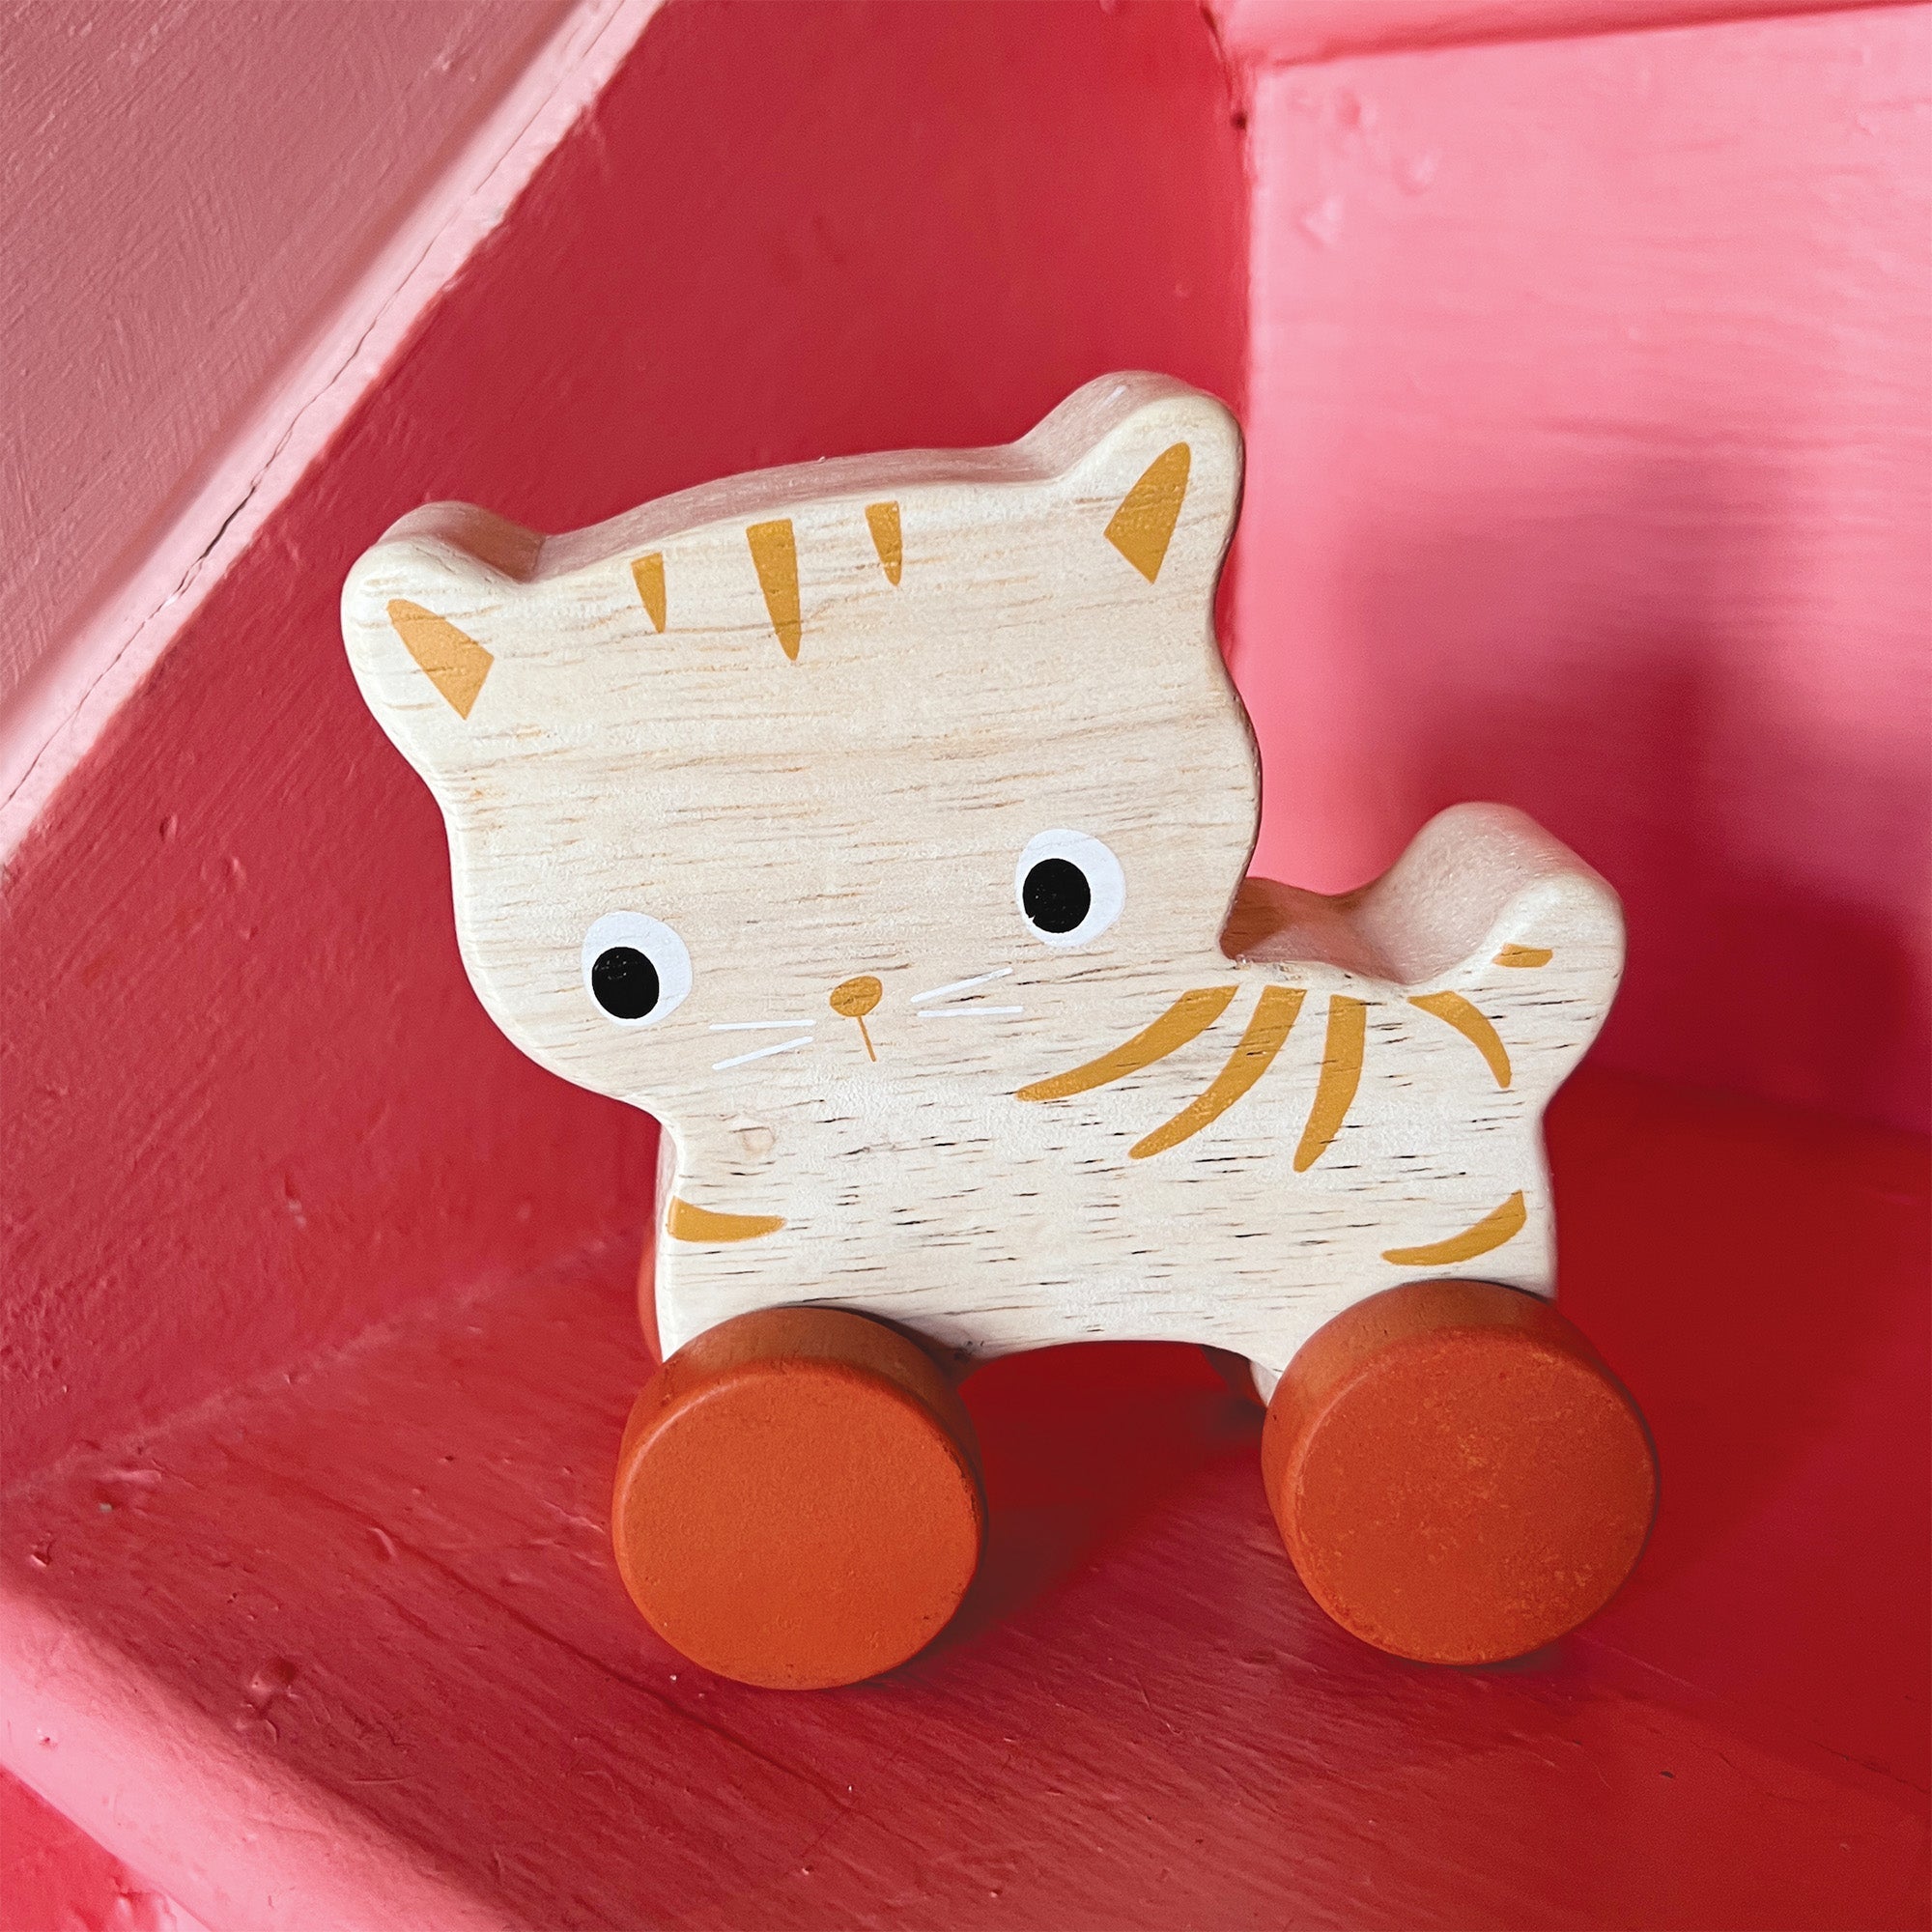 Kitten on Wheels - Mentari - Sustainable Wooden Toys Made in Indonesia - Eco-Friendly Play